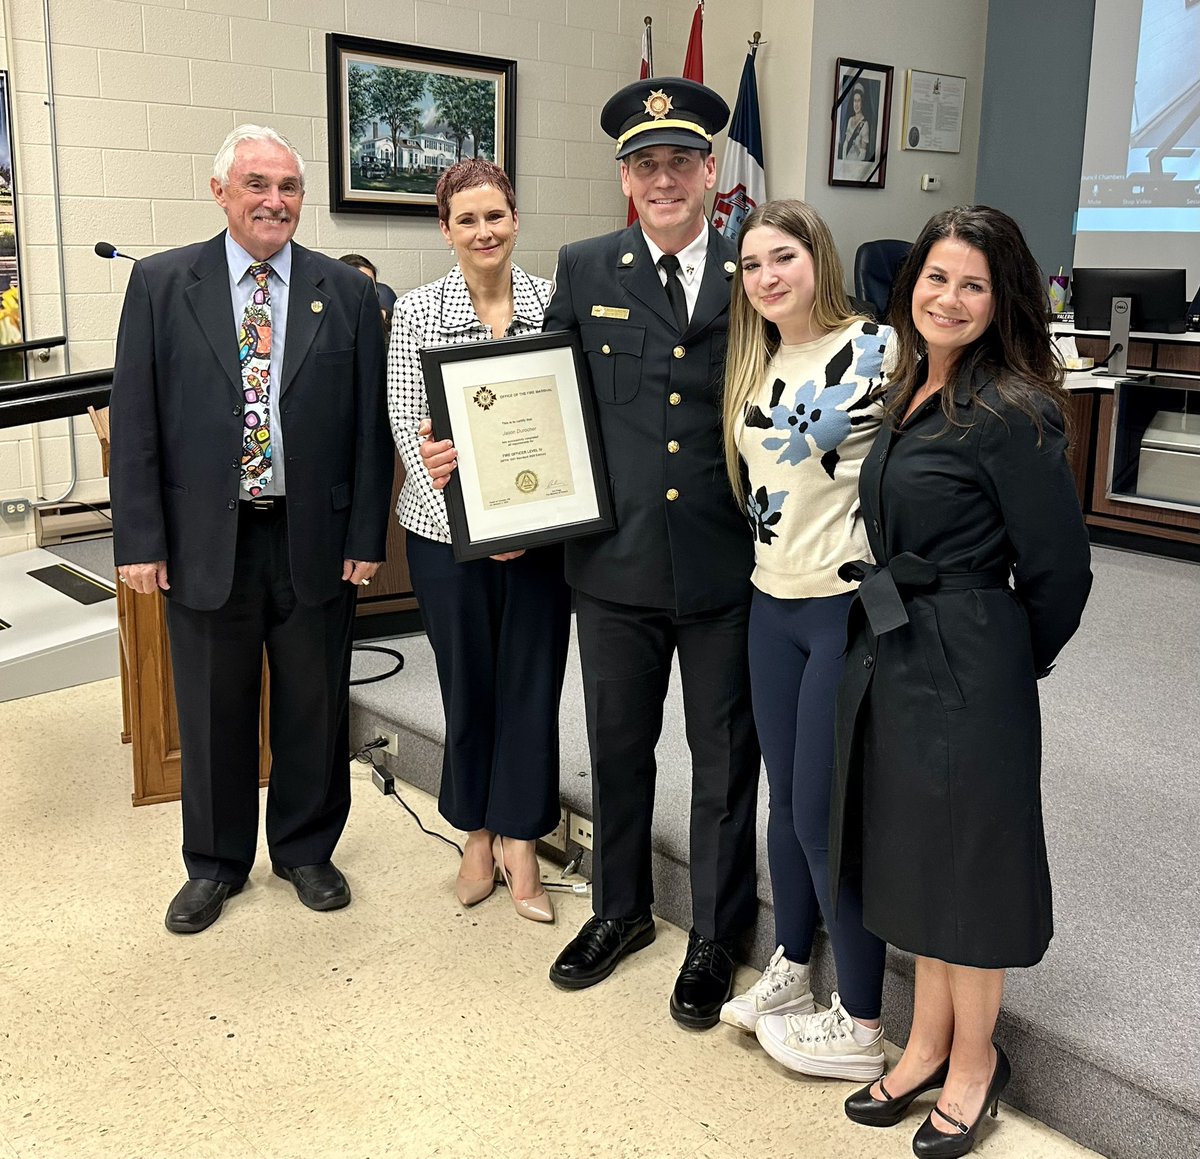 Chief Montone was proud to present District Chief Durocher with his Fire Officer IV Certification tonight at Council! Congratulations DC Durocher on this amazing accomplishment. #amherstburg